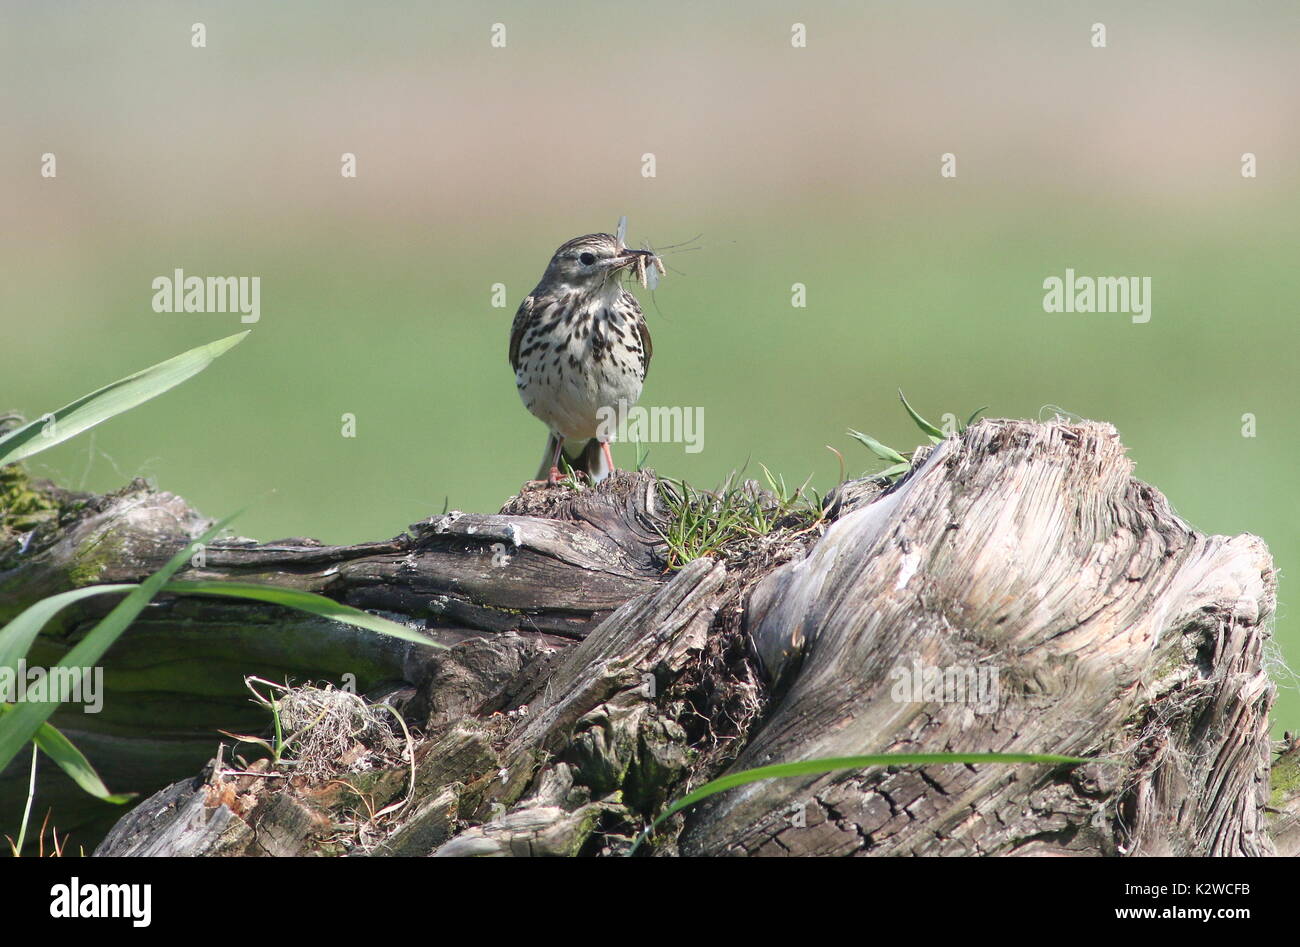 European Meadow Pipit (Anthus pratensis) on a wooden perch. Stock Photo